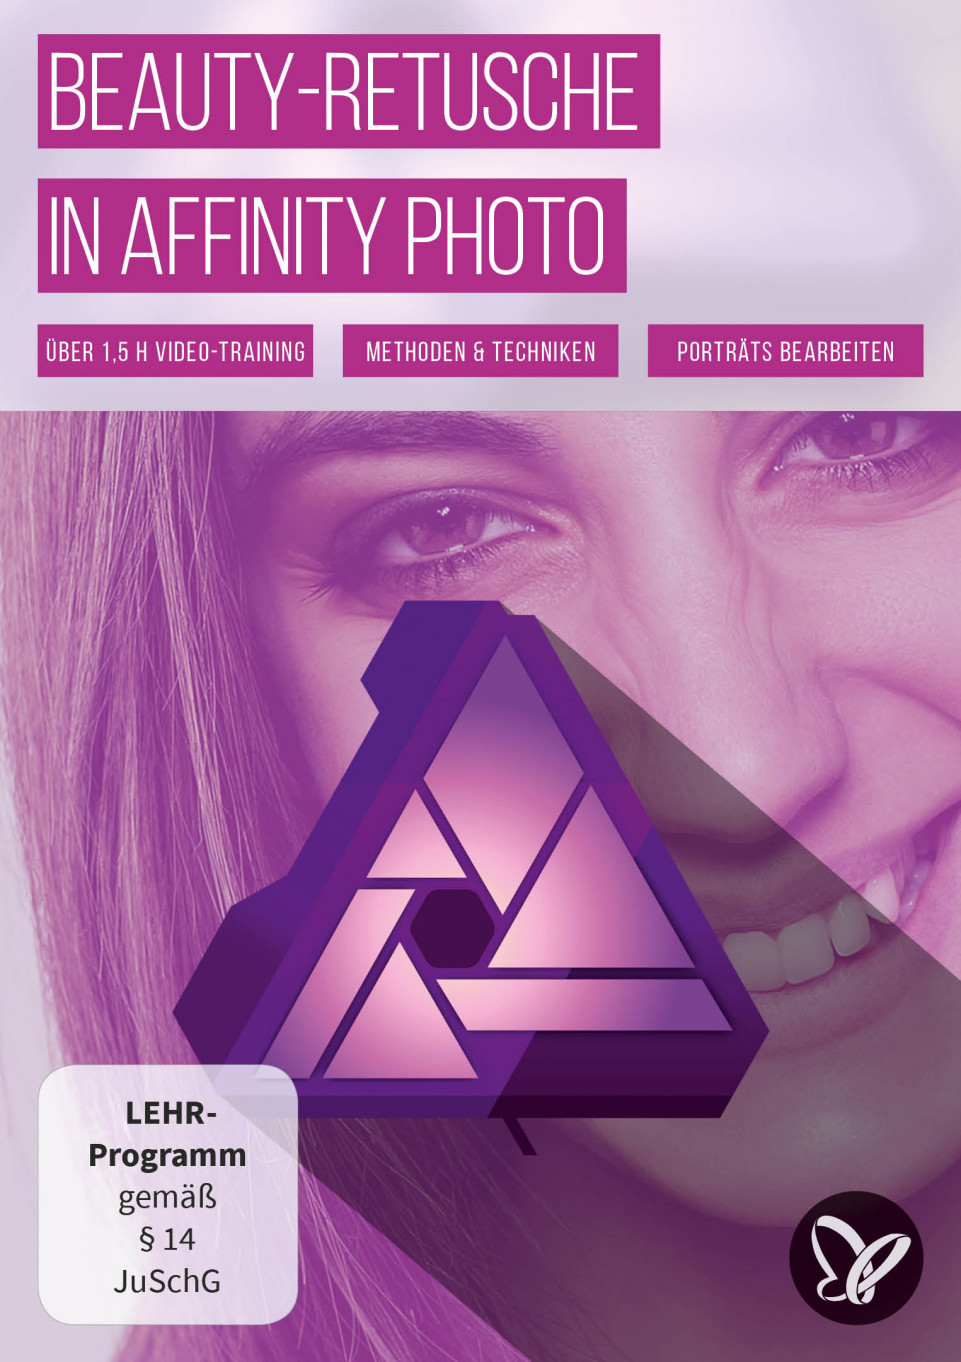 Beauty-Retusche in Affinity Photo – Video-Tutorial